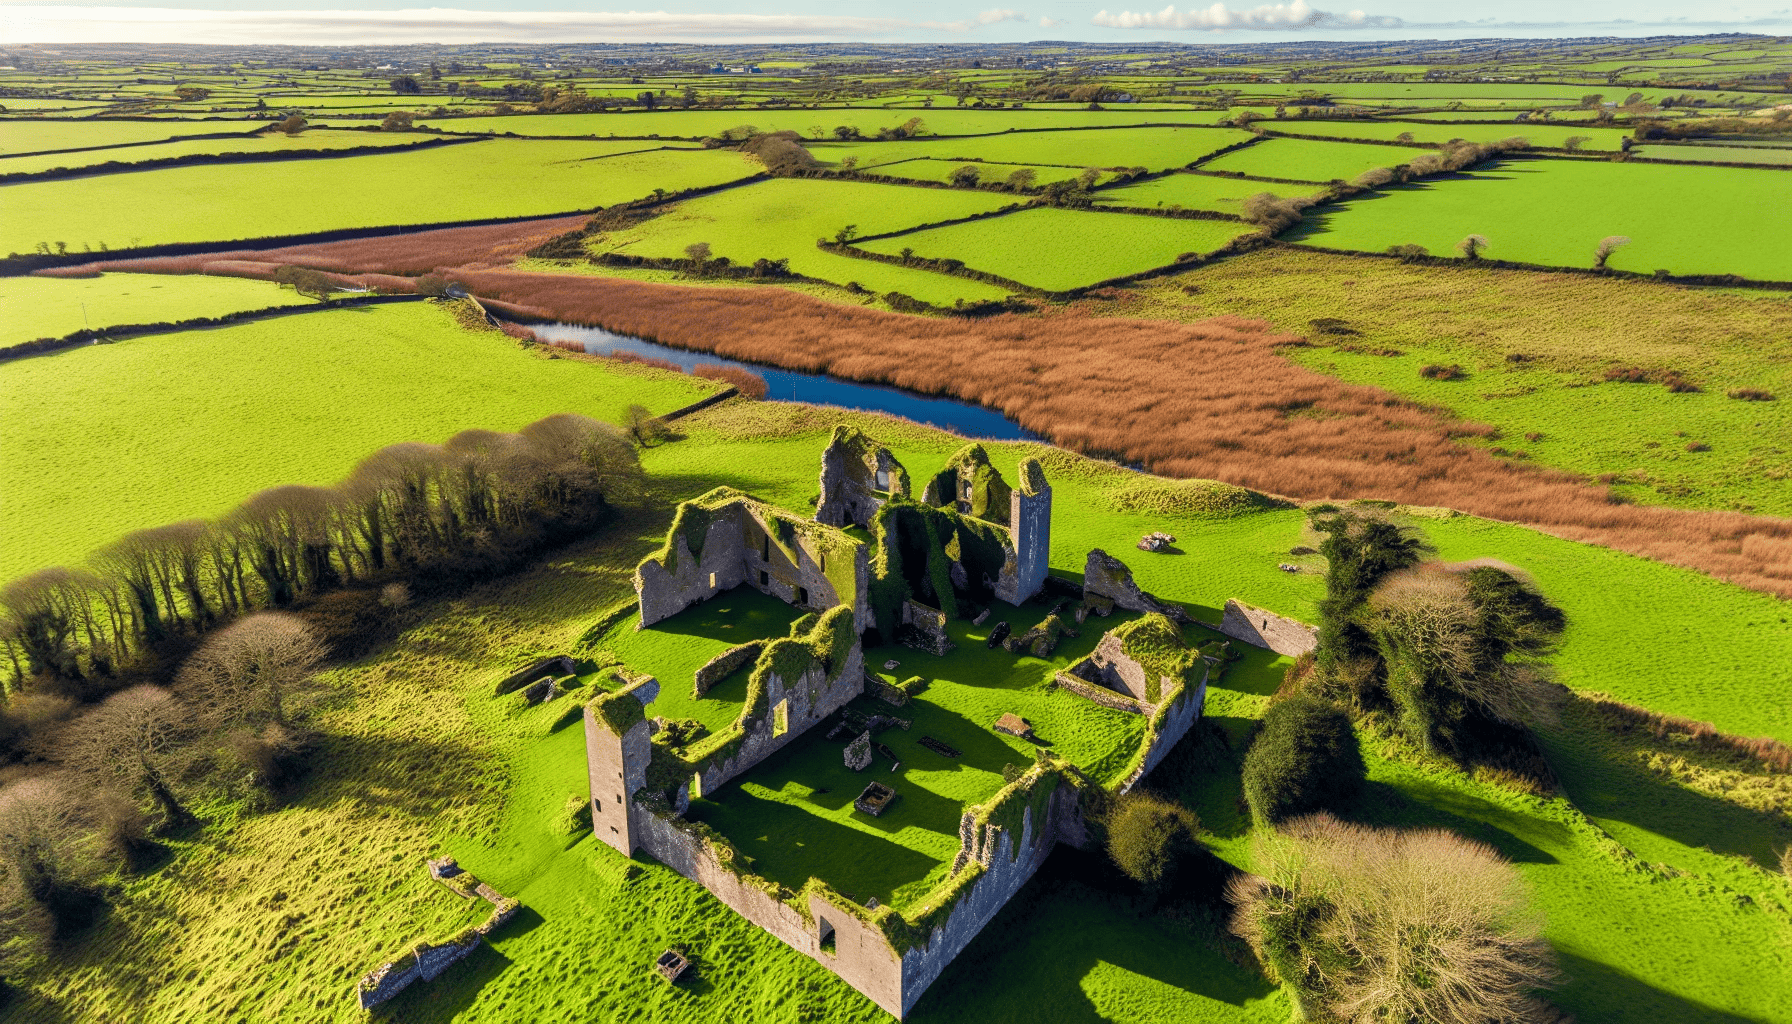 Aerial view of Irish castle ruins surrounded by lush greenery